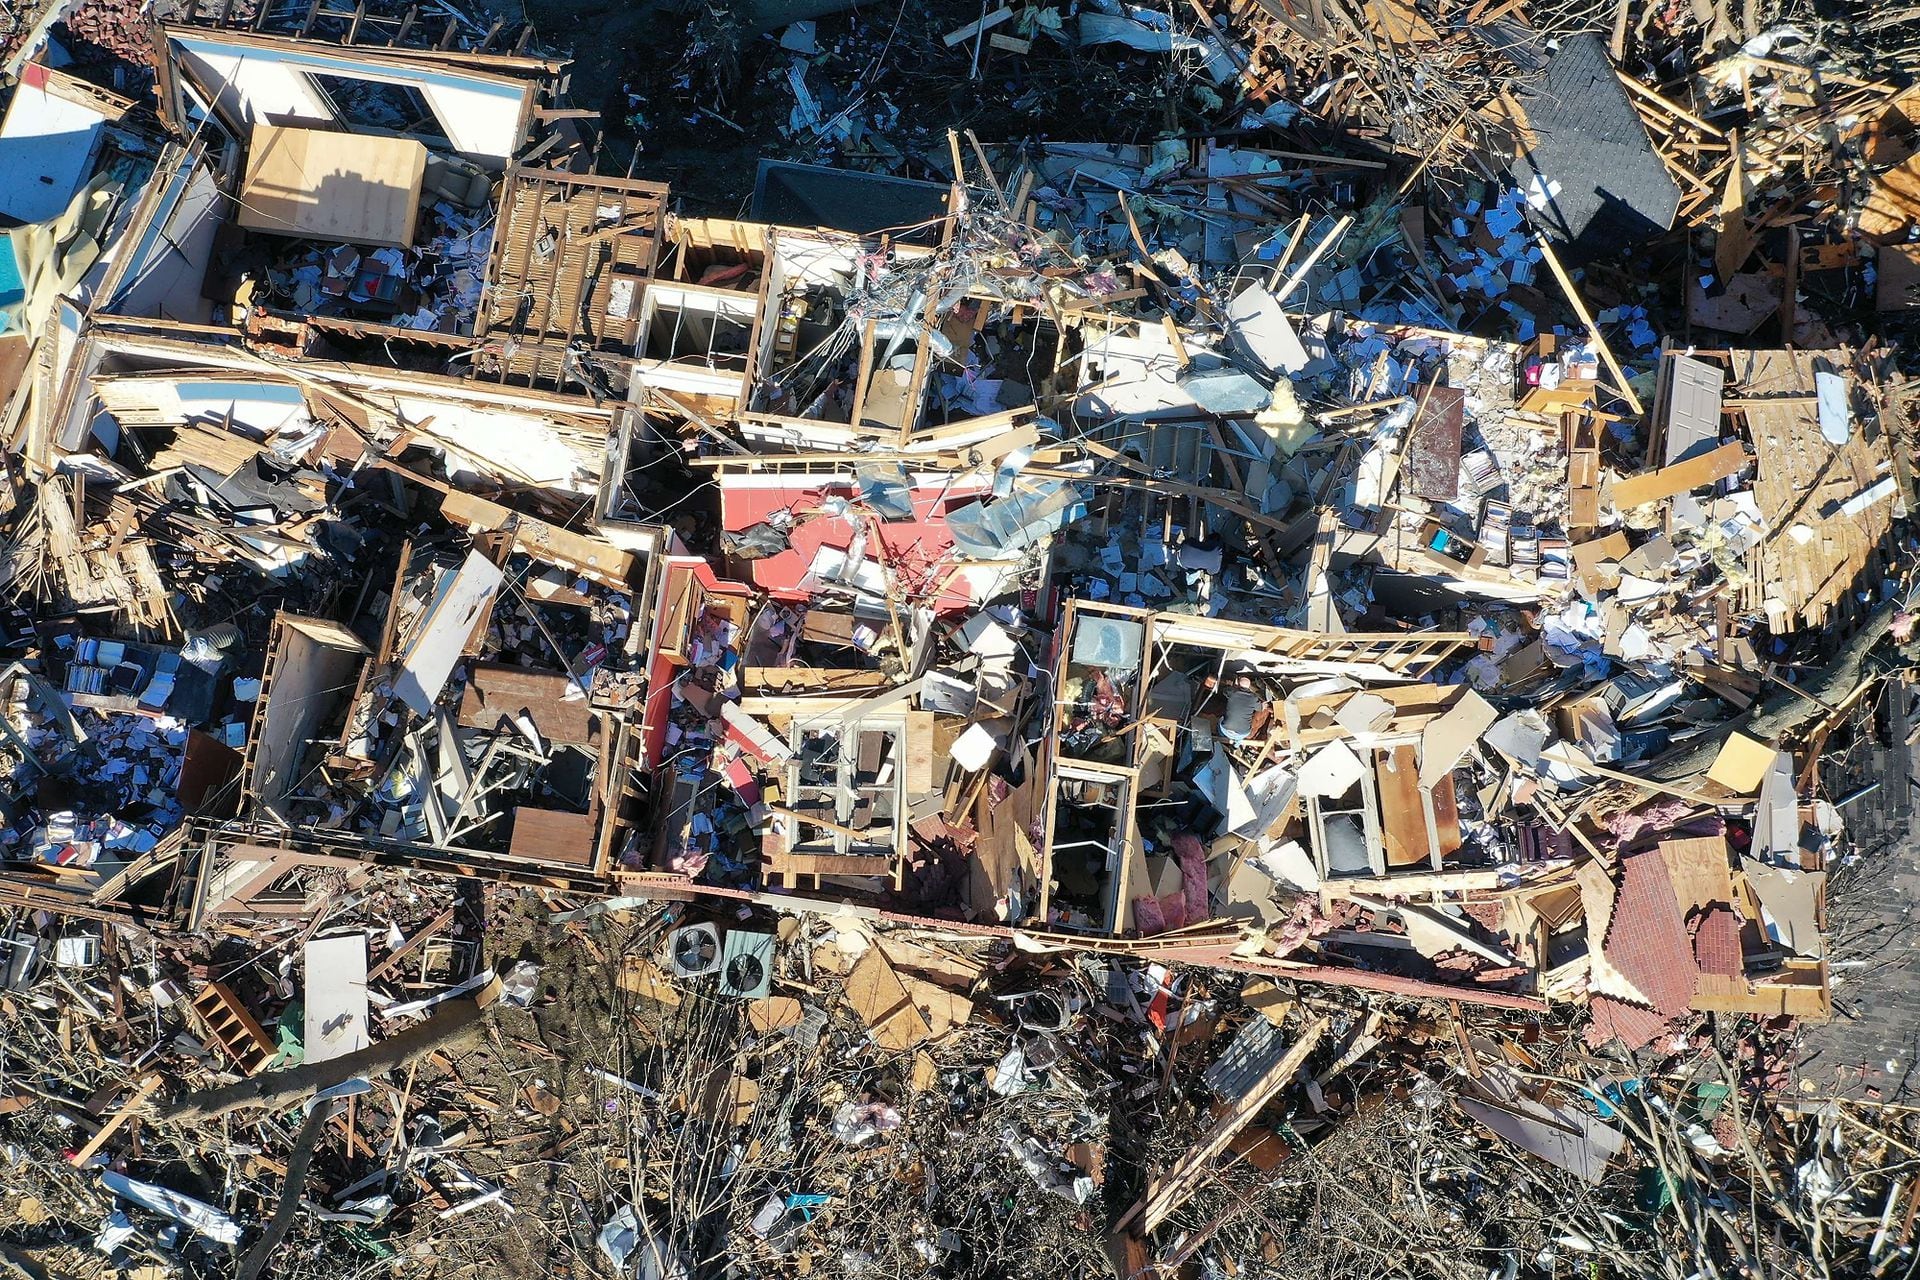 Two days ago, on December 12, 2021, recovery and cleanup continued after Hurricane Mayfield in Kentucky.